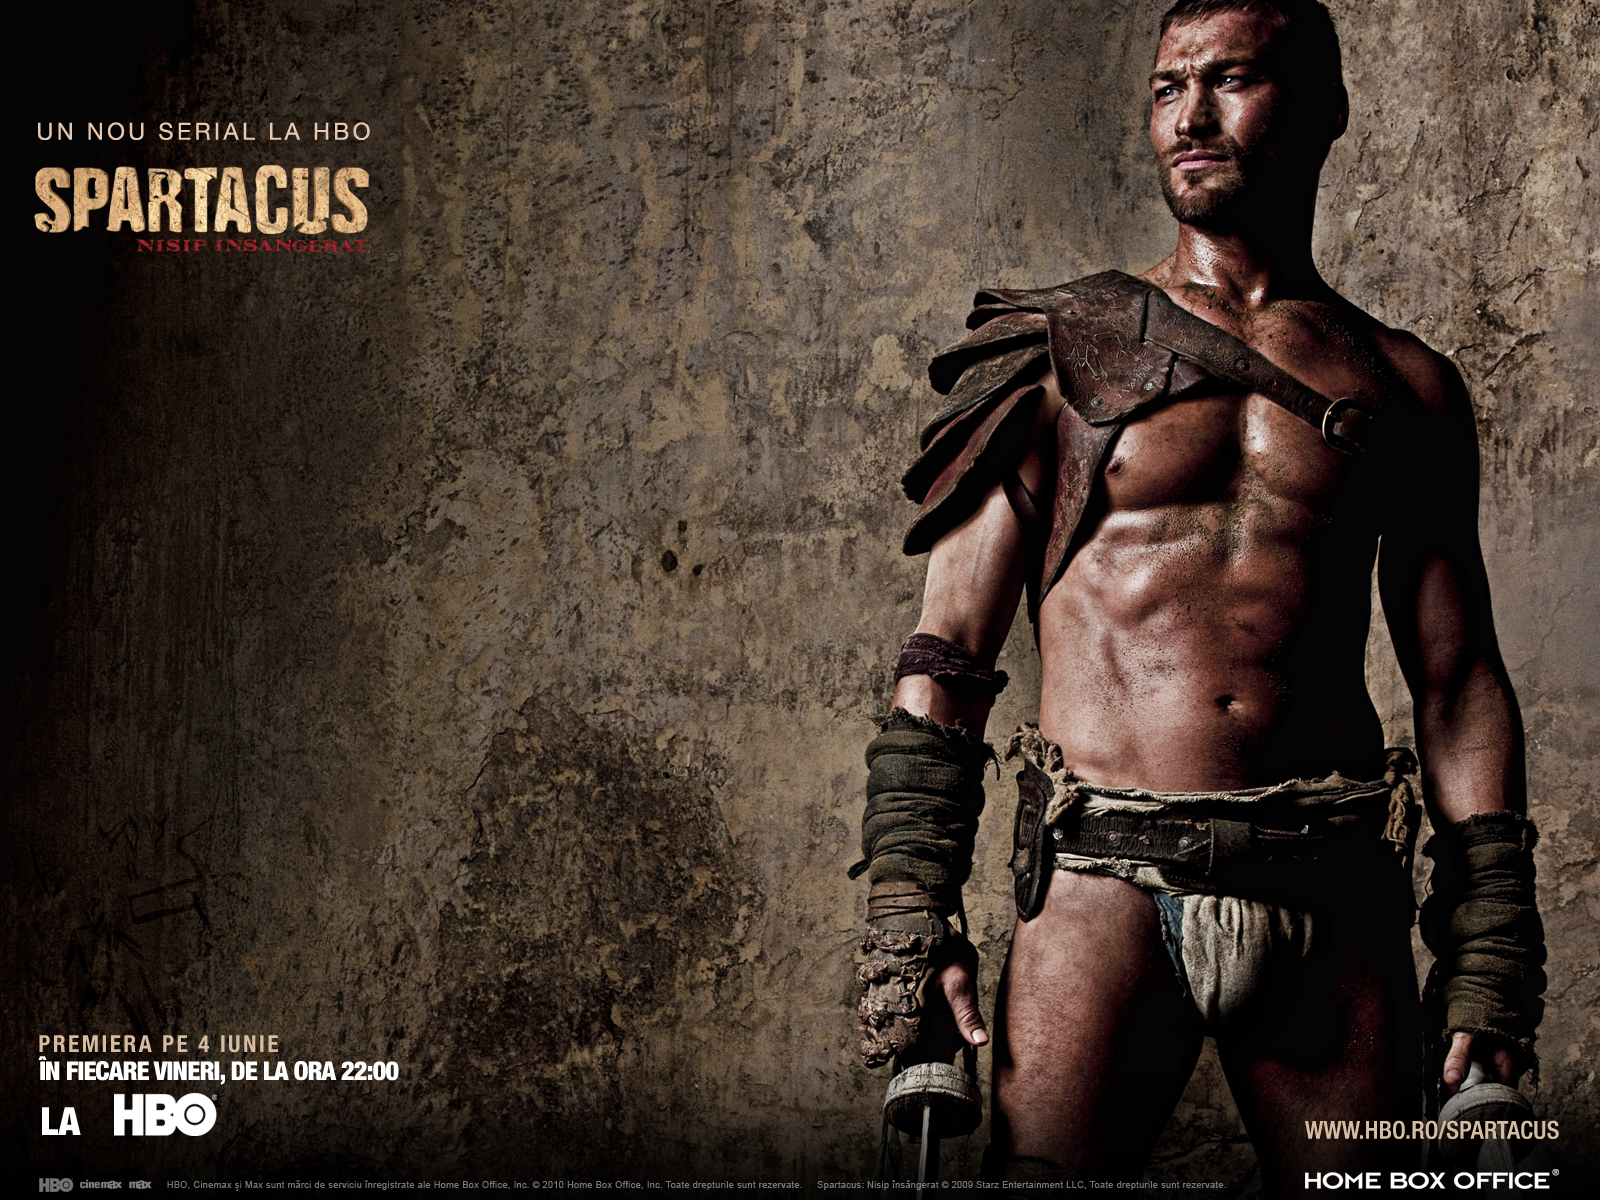 Wallpapers Spartacus Extra Hbo Rom Nia 1600x1200 | #1596417 #spartacus